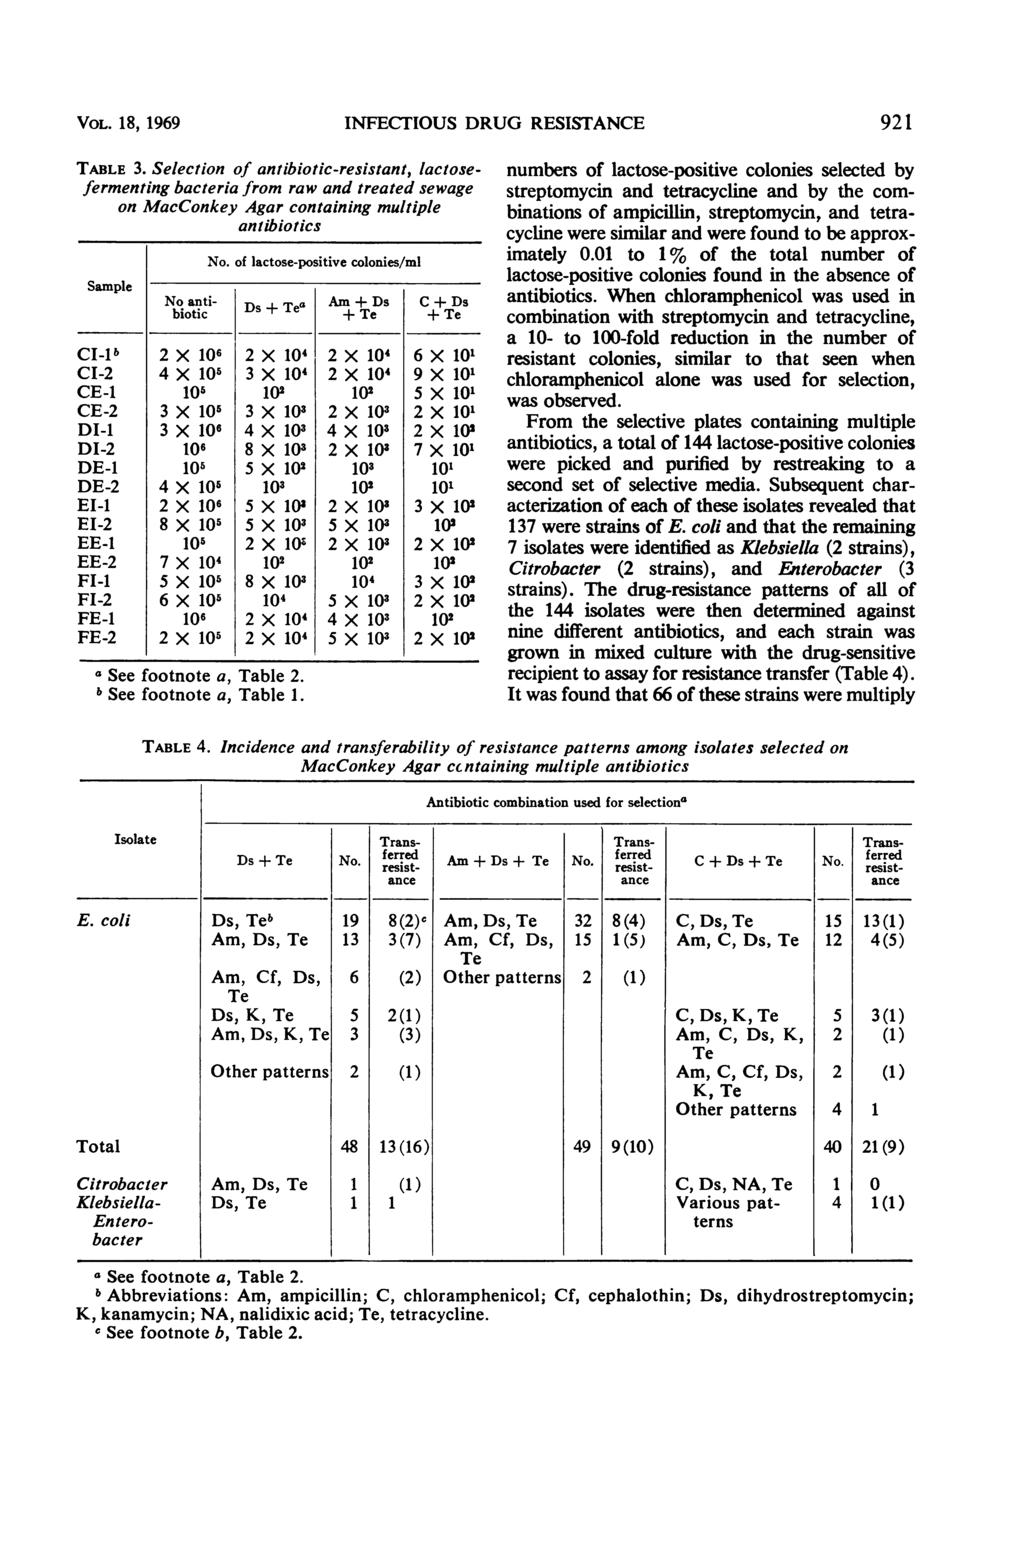 VOL. 8, 969 INFECTIOUS DRUG RESISTANCE 9 TABLE 3.